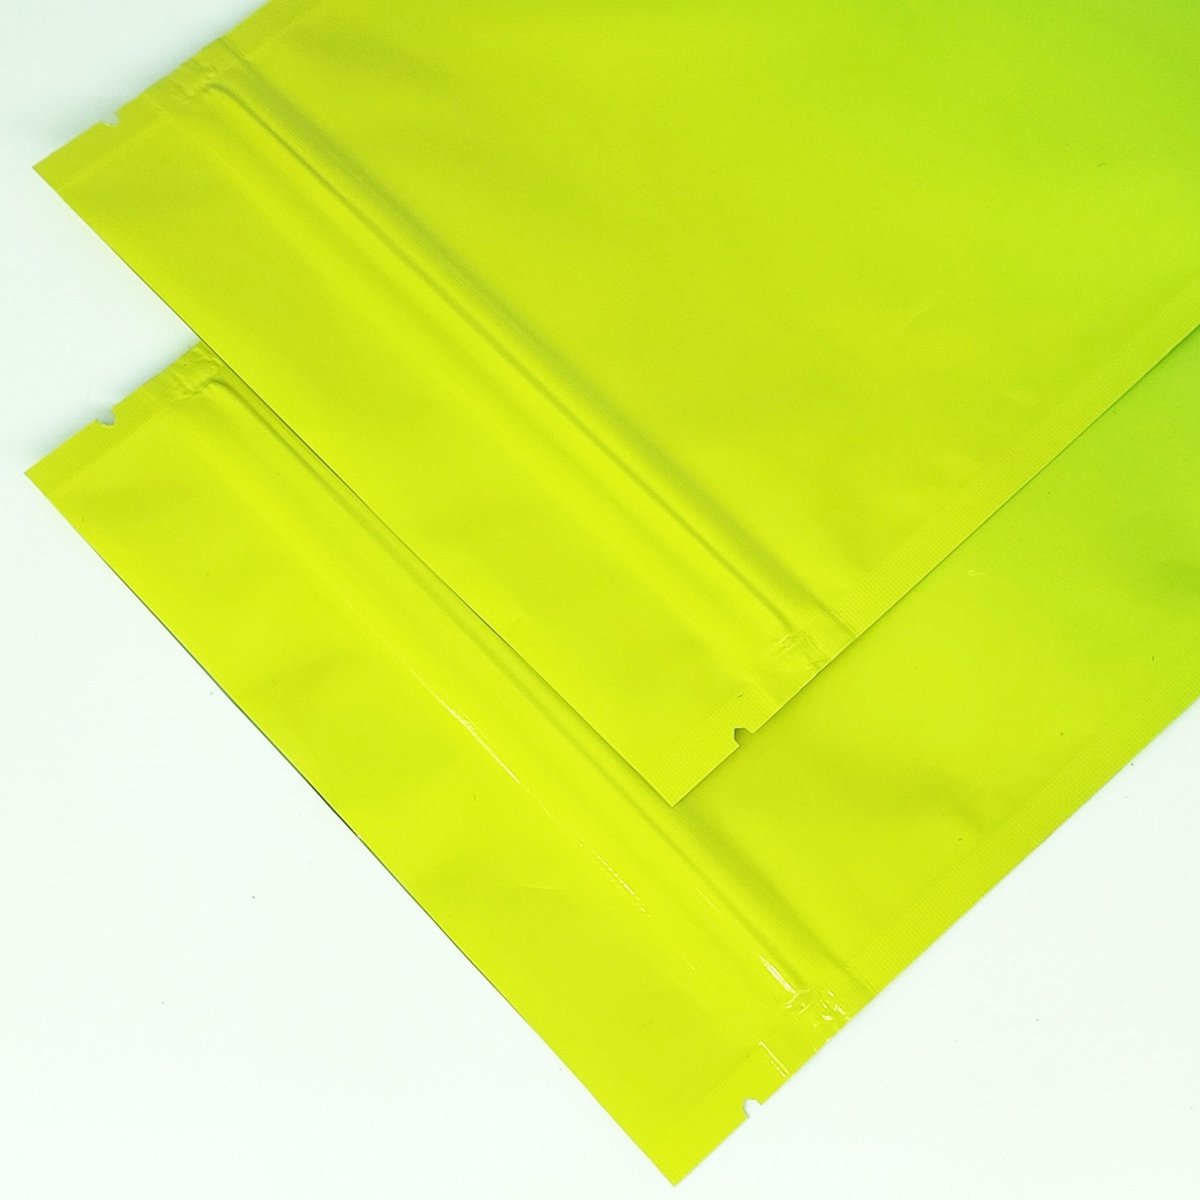 Glossy Double-Sided Two-Tone Ombre Gradient Mylar Bags - Katady packaging